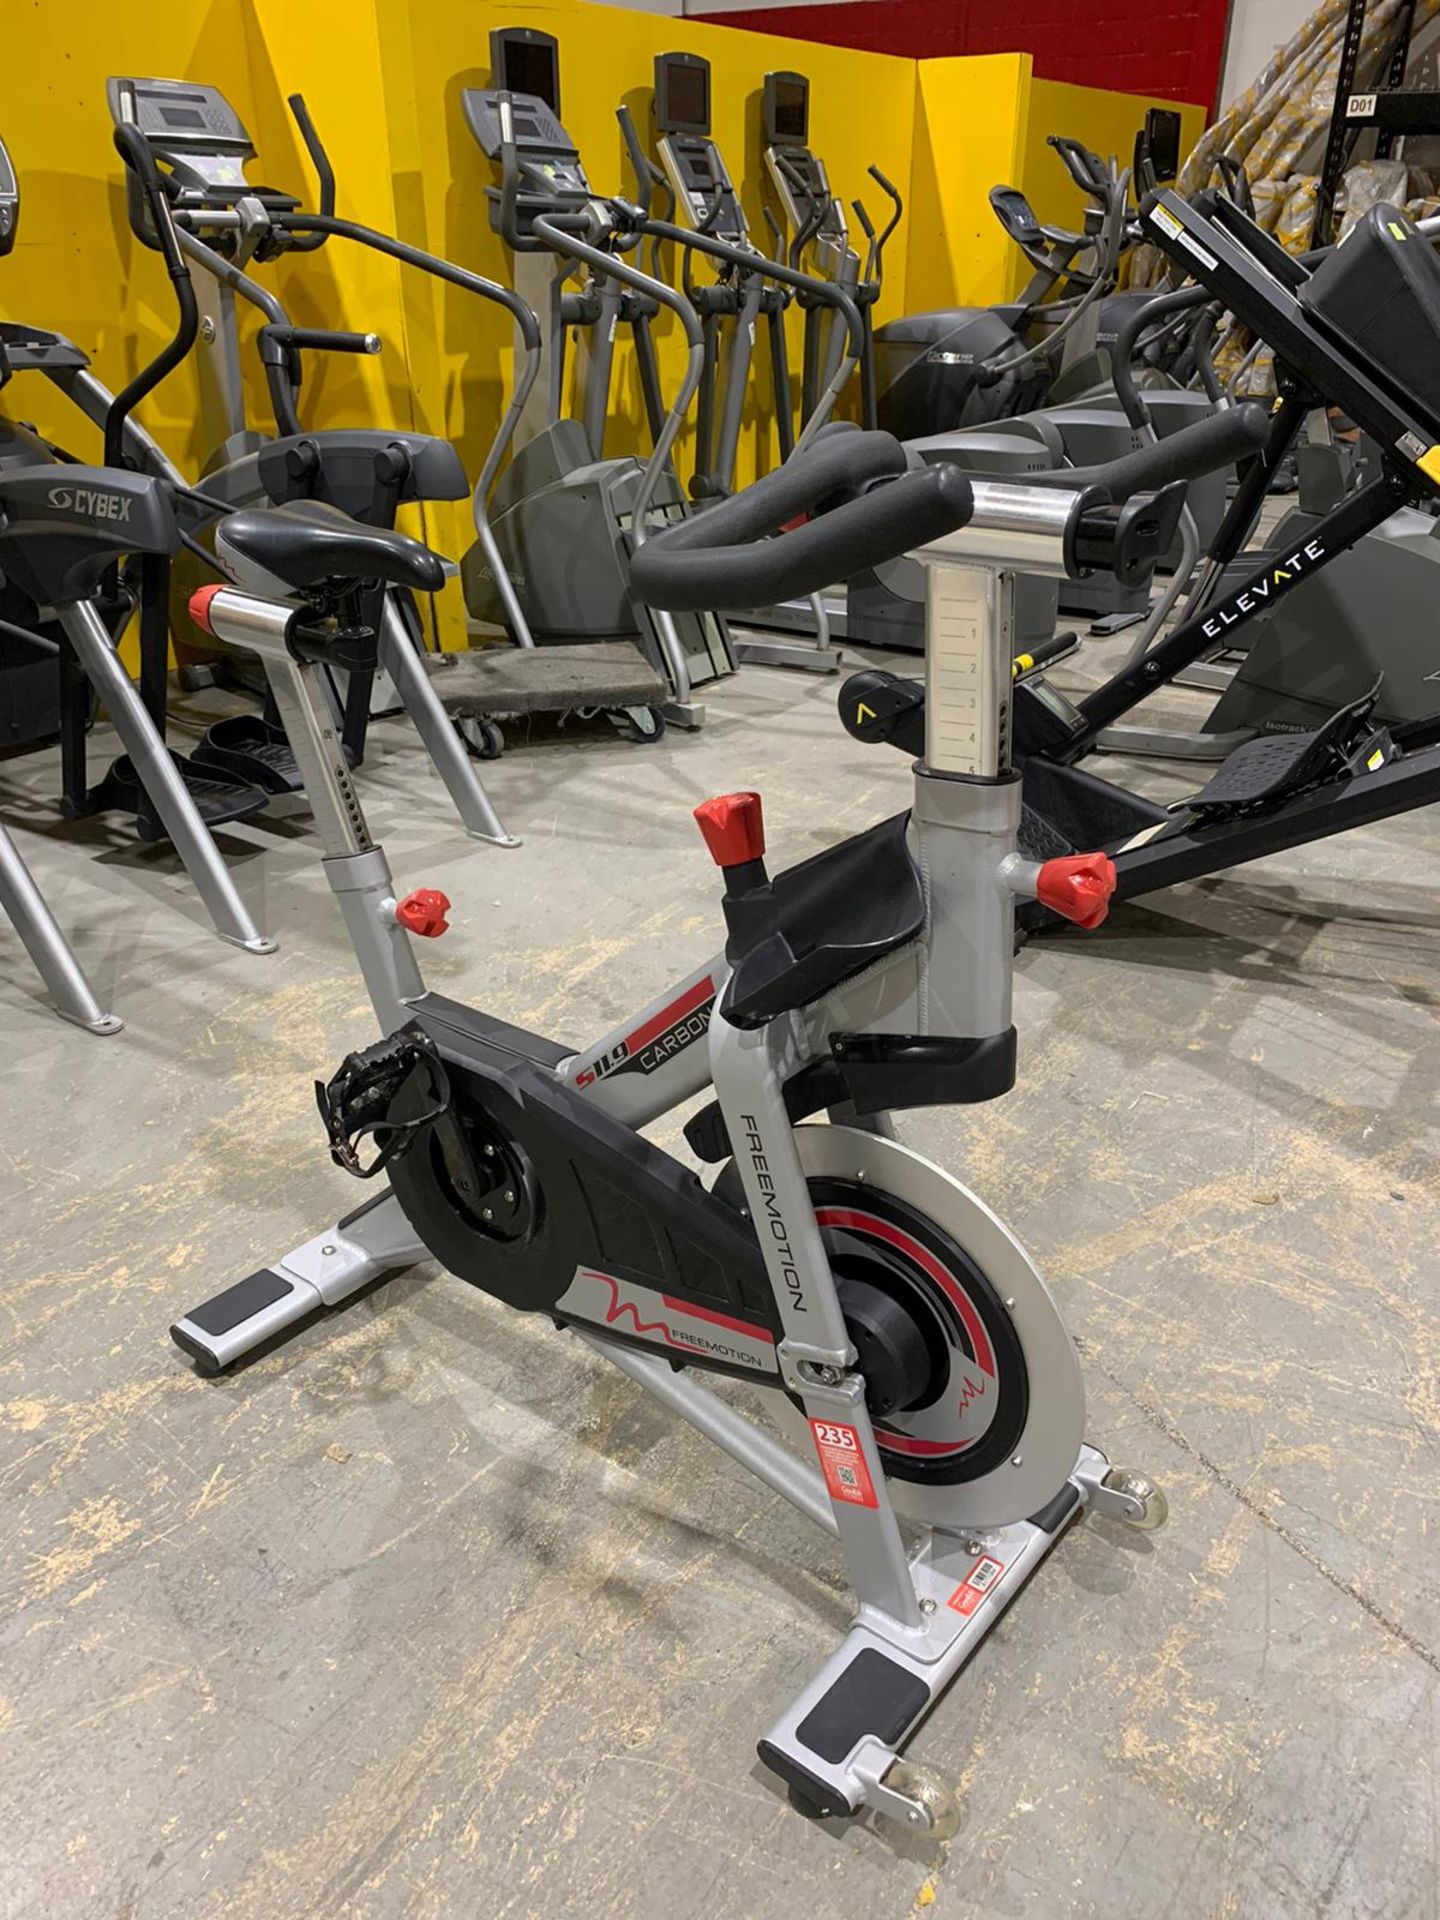 FREEMOTION S11.9 CARBON DRIVE INDOOR CYCLE MACHINE - Image 2 of 4